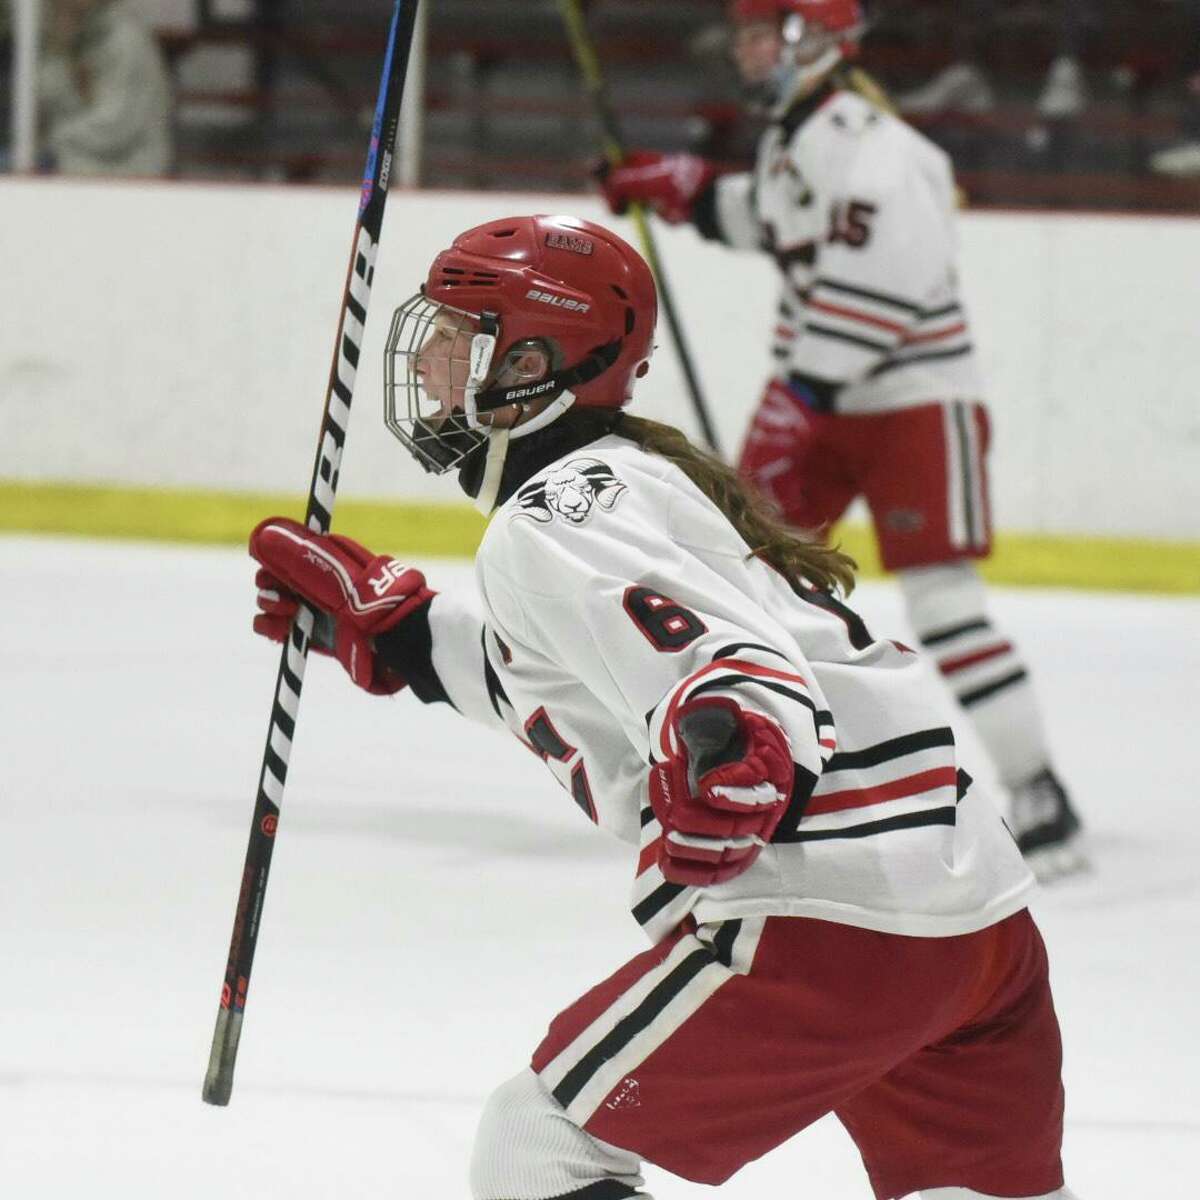 New Canaan’s Jade Lowe celebrates a first-period goal against Greenwich during the FCIAC girls hockey semifinals on Wednesday, February 23, 2022 at the Darien Ice House in Darien, Conn.